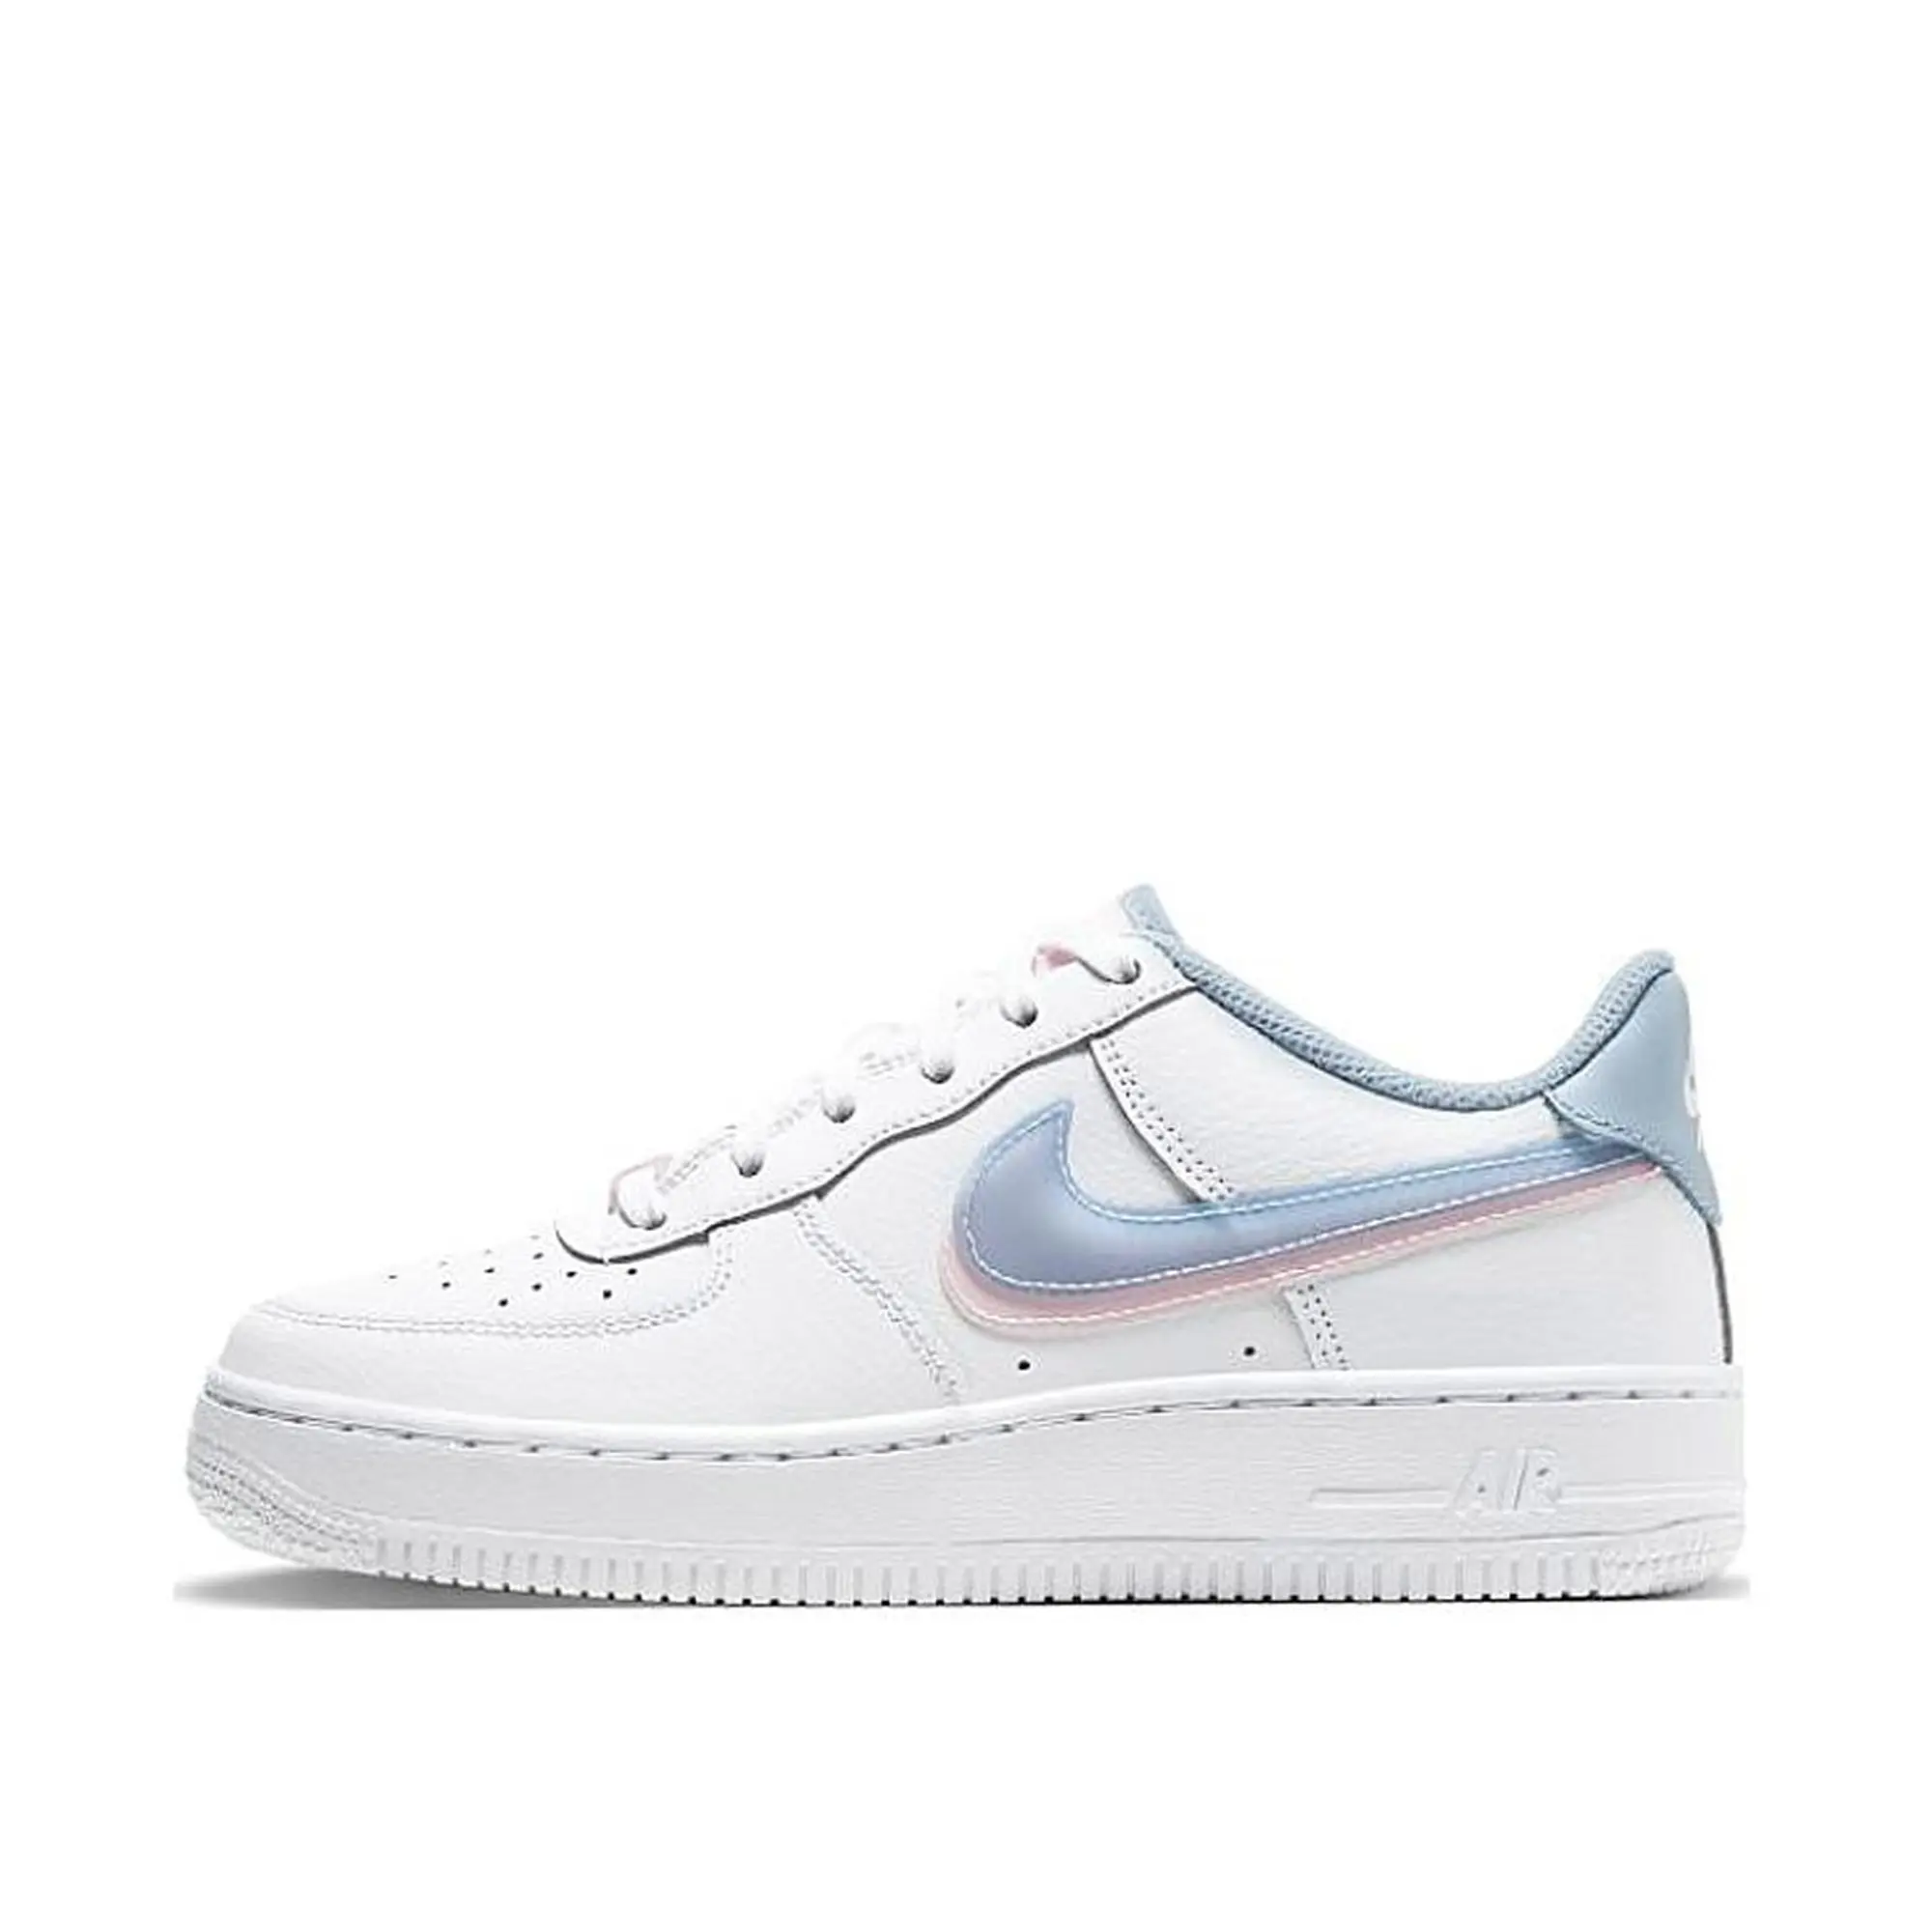 Nike Nike Air Force 1 Low 07 LV8 Double Swoosh White Armory Blue GS